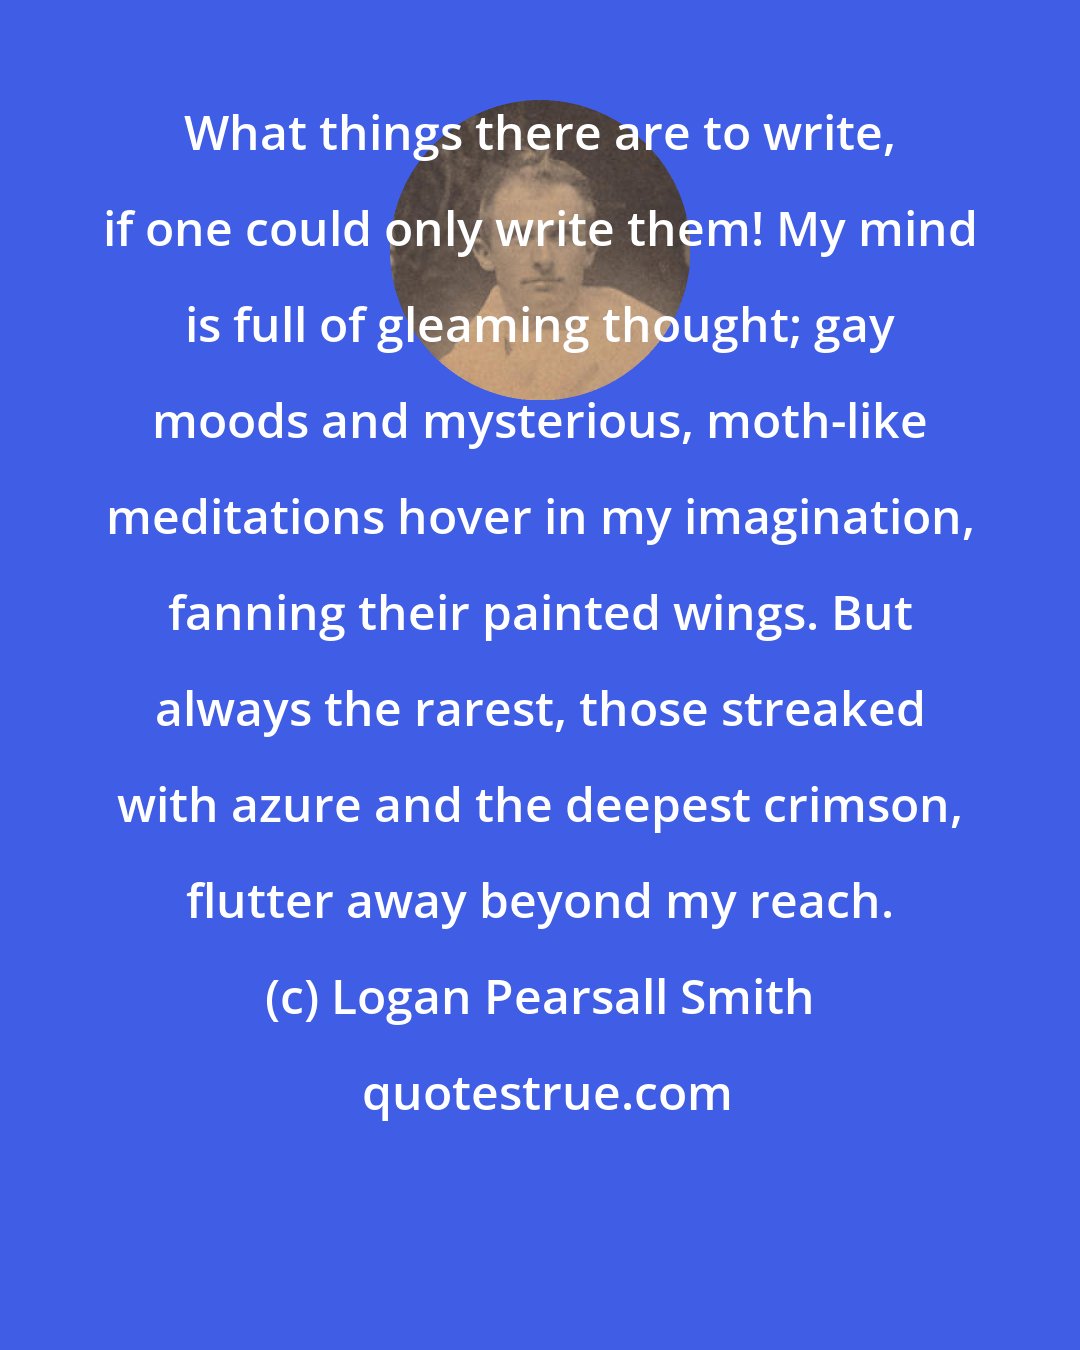 Logan Pearsall Smith: What things there are to write, if one could only write them! My mind is full of gleaming thought; gay moods and mysterious, moth-like meditations hover in my imagination, fanning their painted wings. But always the rarest, those streaked with azure and the deepest crimson, flutter away beyond my reach.